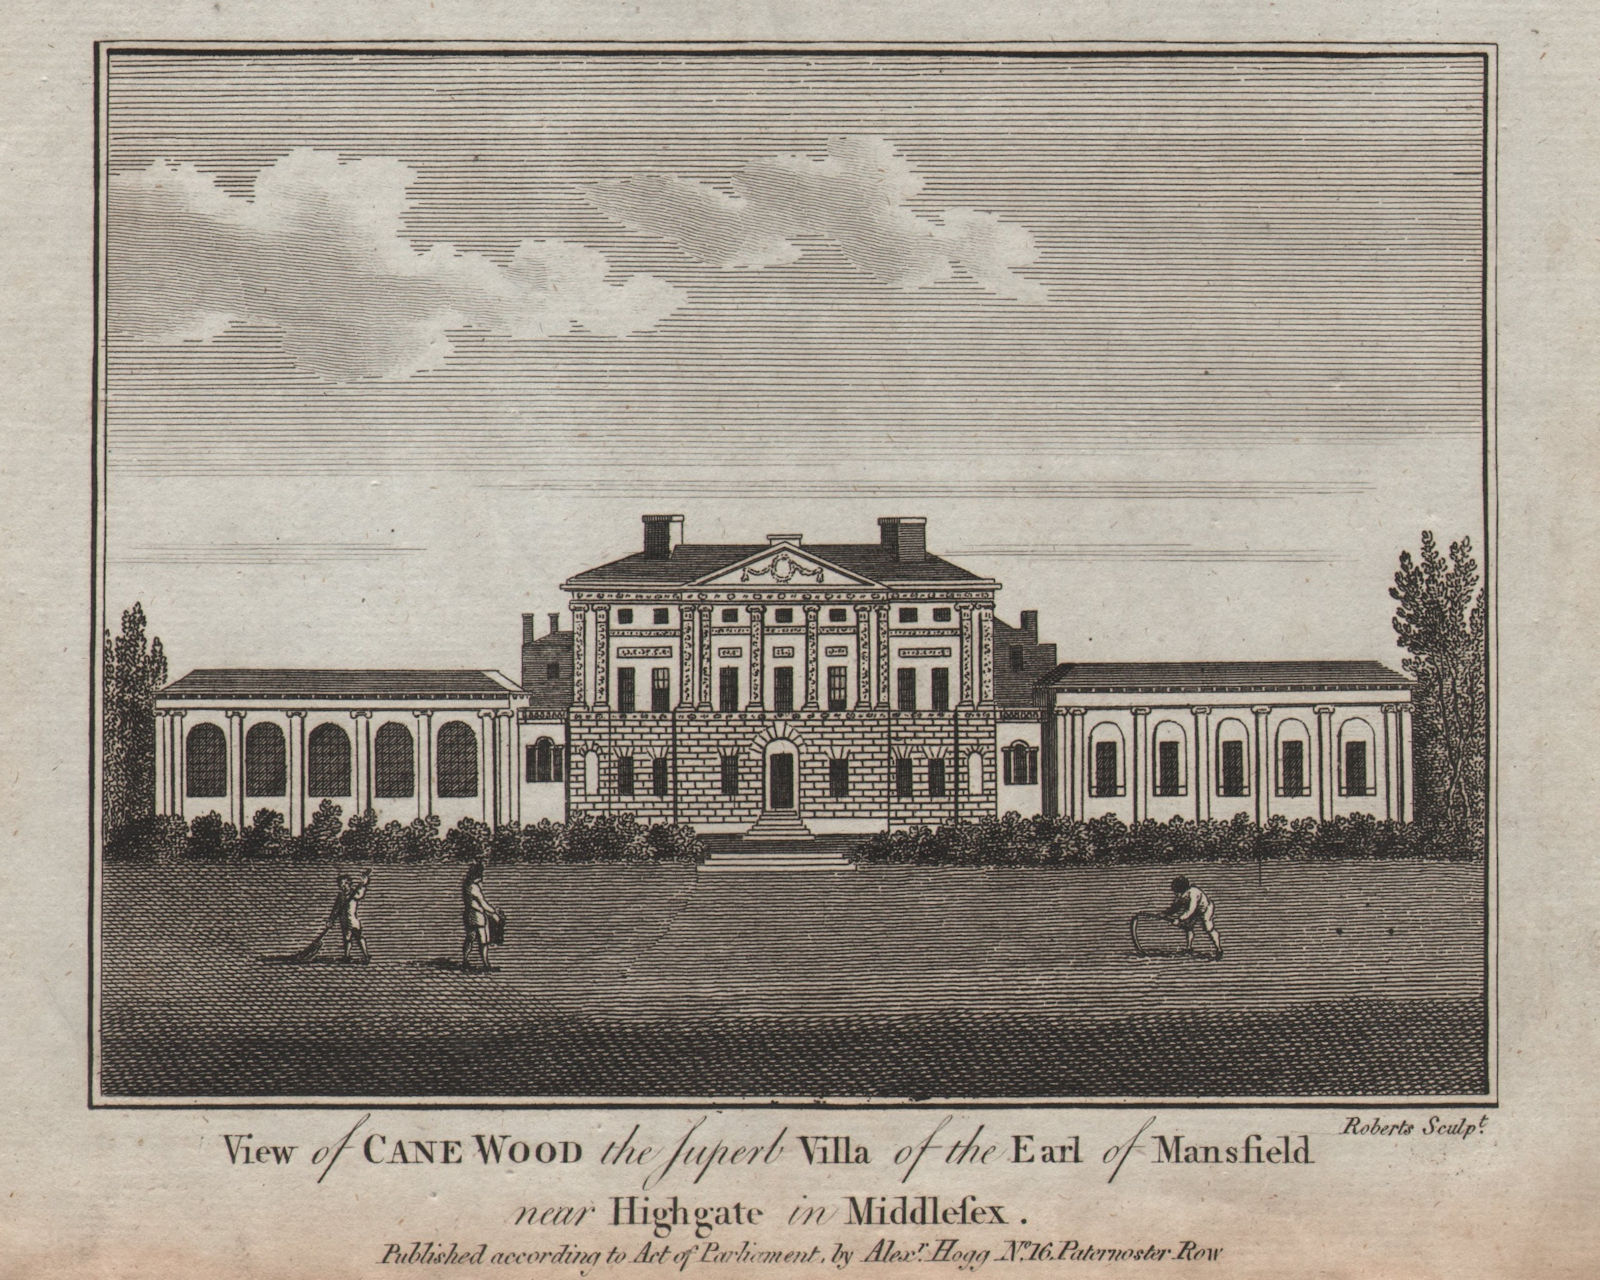 View of "Cane wood" / Kenwood House, Hampstead. Earl of Mansfield. THORNTON 1784